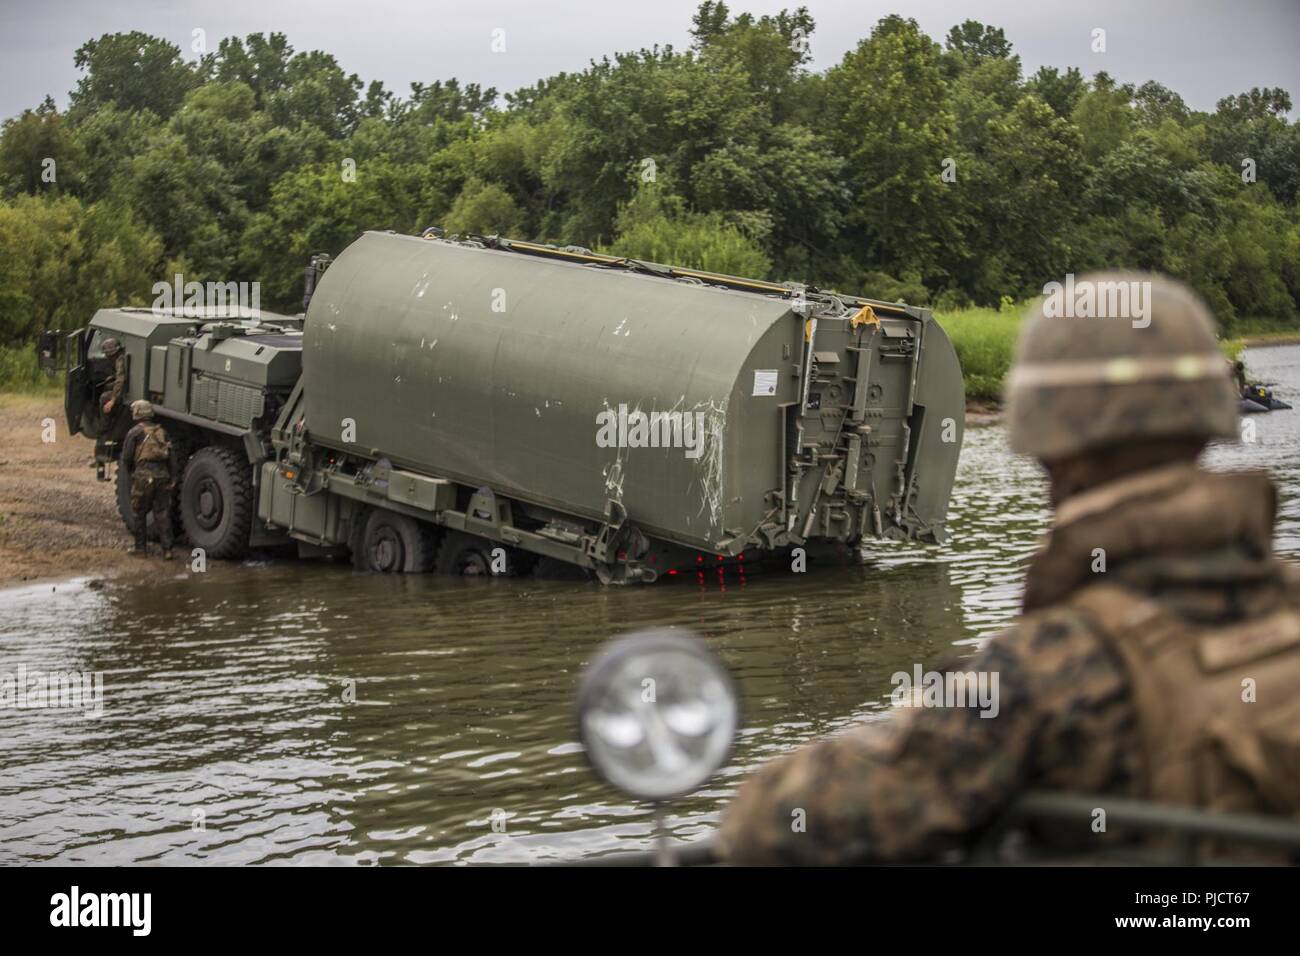 U.S. Marines with Bridge Company, 7th Engineer Support Battalion, 1st Marine Logistics Group, use a Logistics Vehicle System Replacement truck to drop bridge bays in the Arkansas River at Fort Chaffee, Ark., July 18, 2018. The culminating event at the end of River Assault 2018 was a 45-bay continuous span bridge across the Arkansas River. Stock Photo